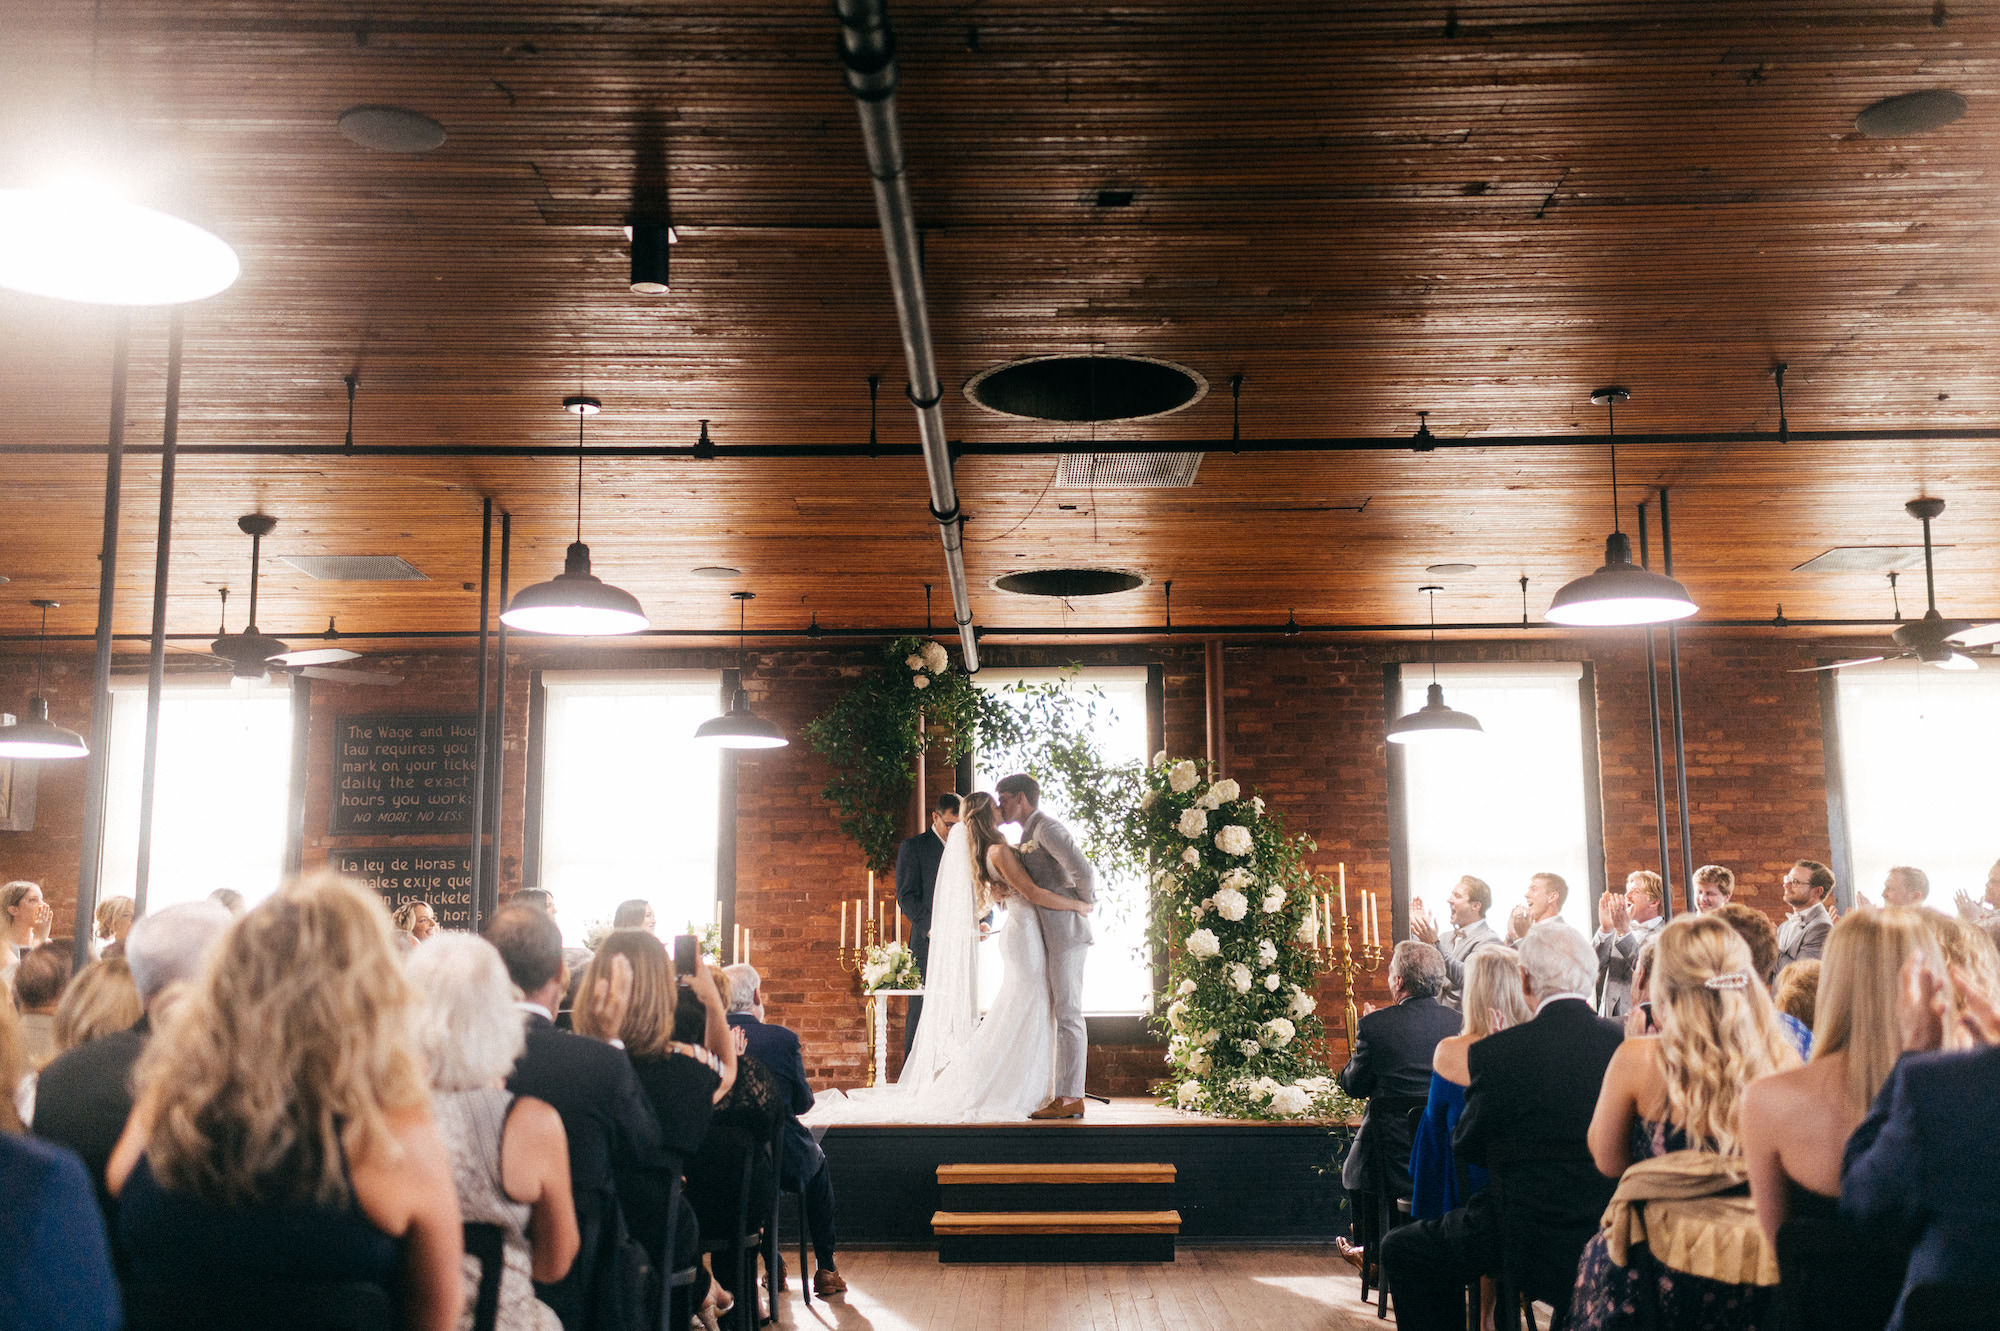 Bride and Groom Wedding Vows Kiss. Greenery Ceremony Arch with White Flowers| Tampa Bay Wedding Venue J.C. Newman Cigar Co. | Florida Wedding Planner Parties A La Carte | Florist Bruce Wayne Florals